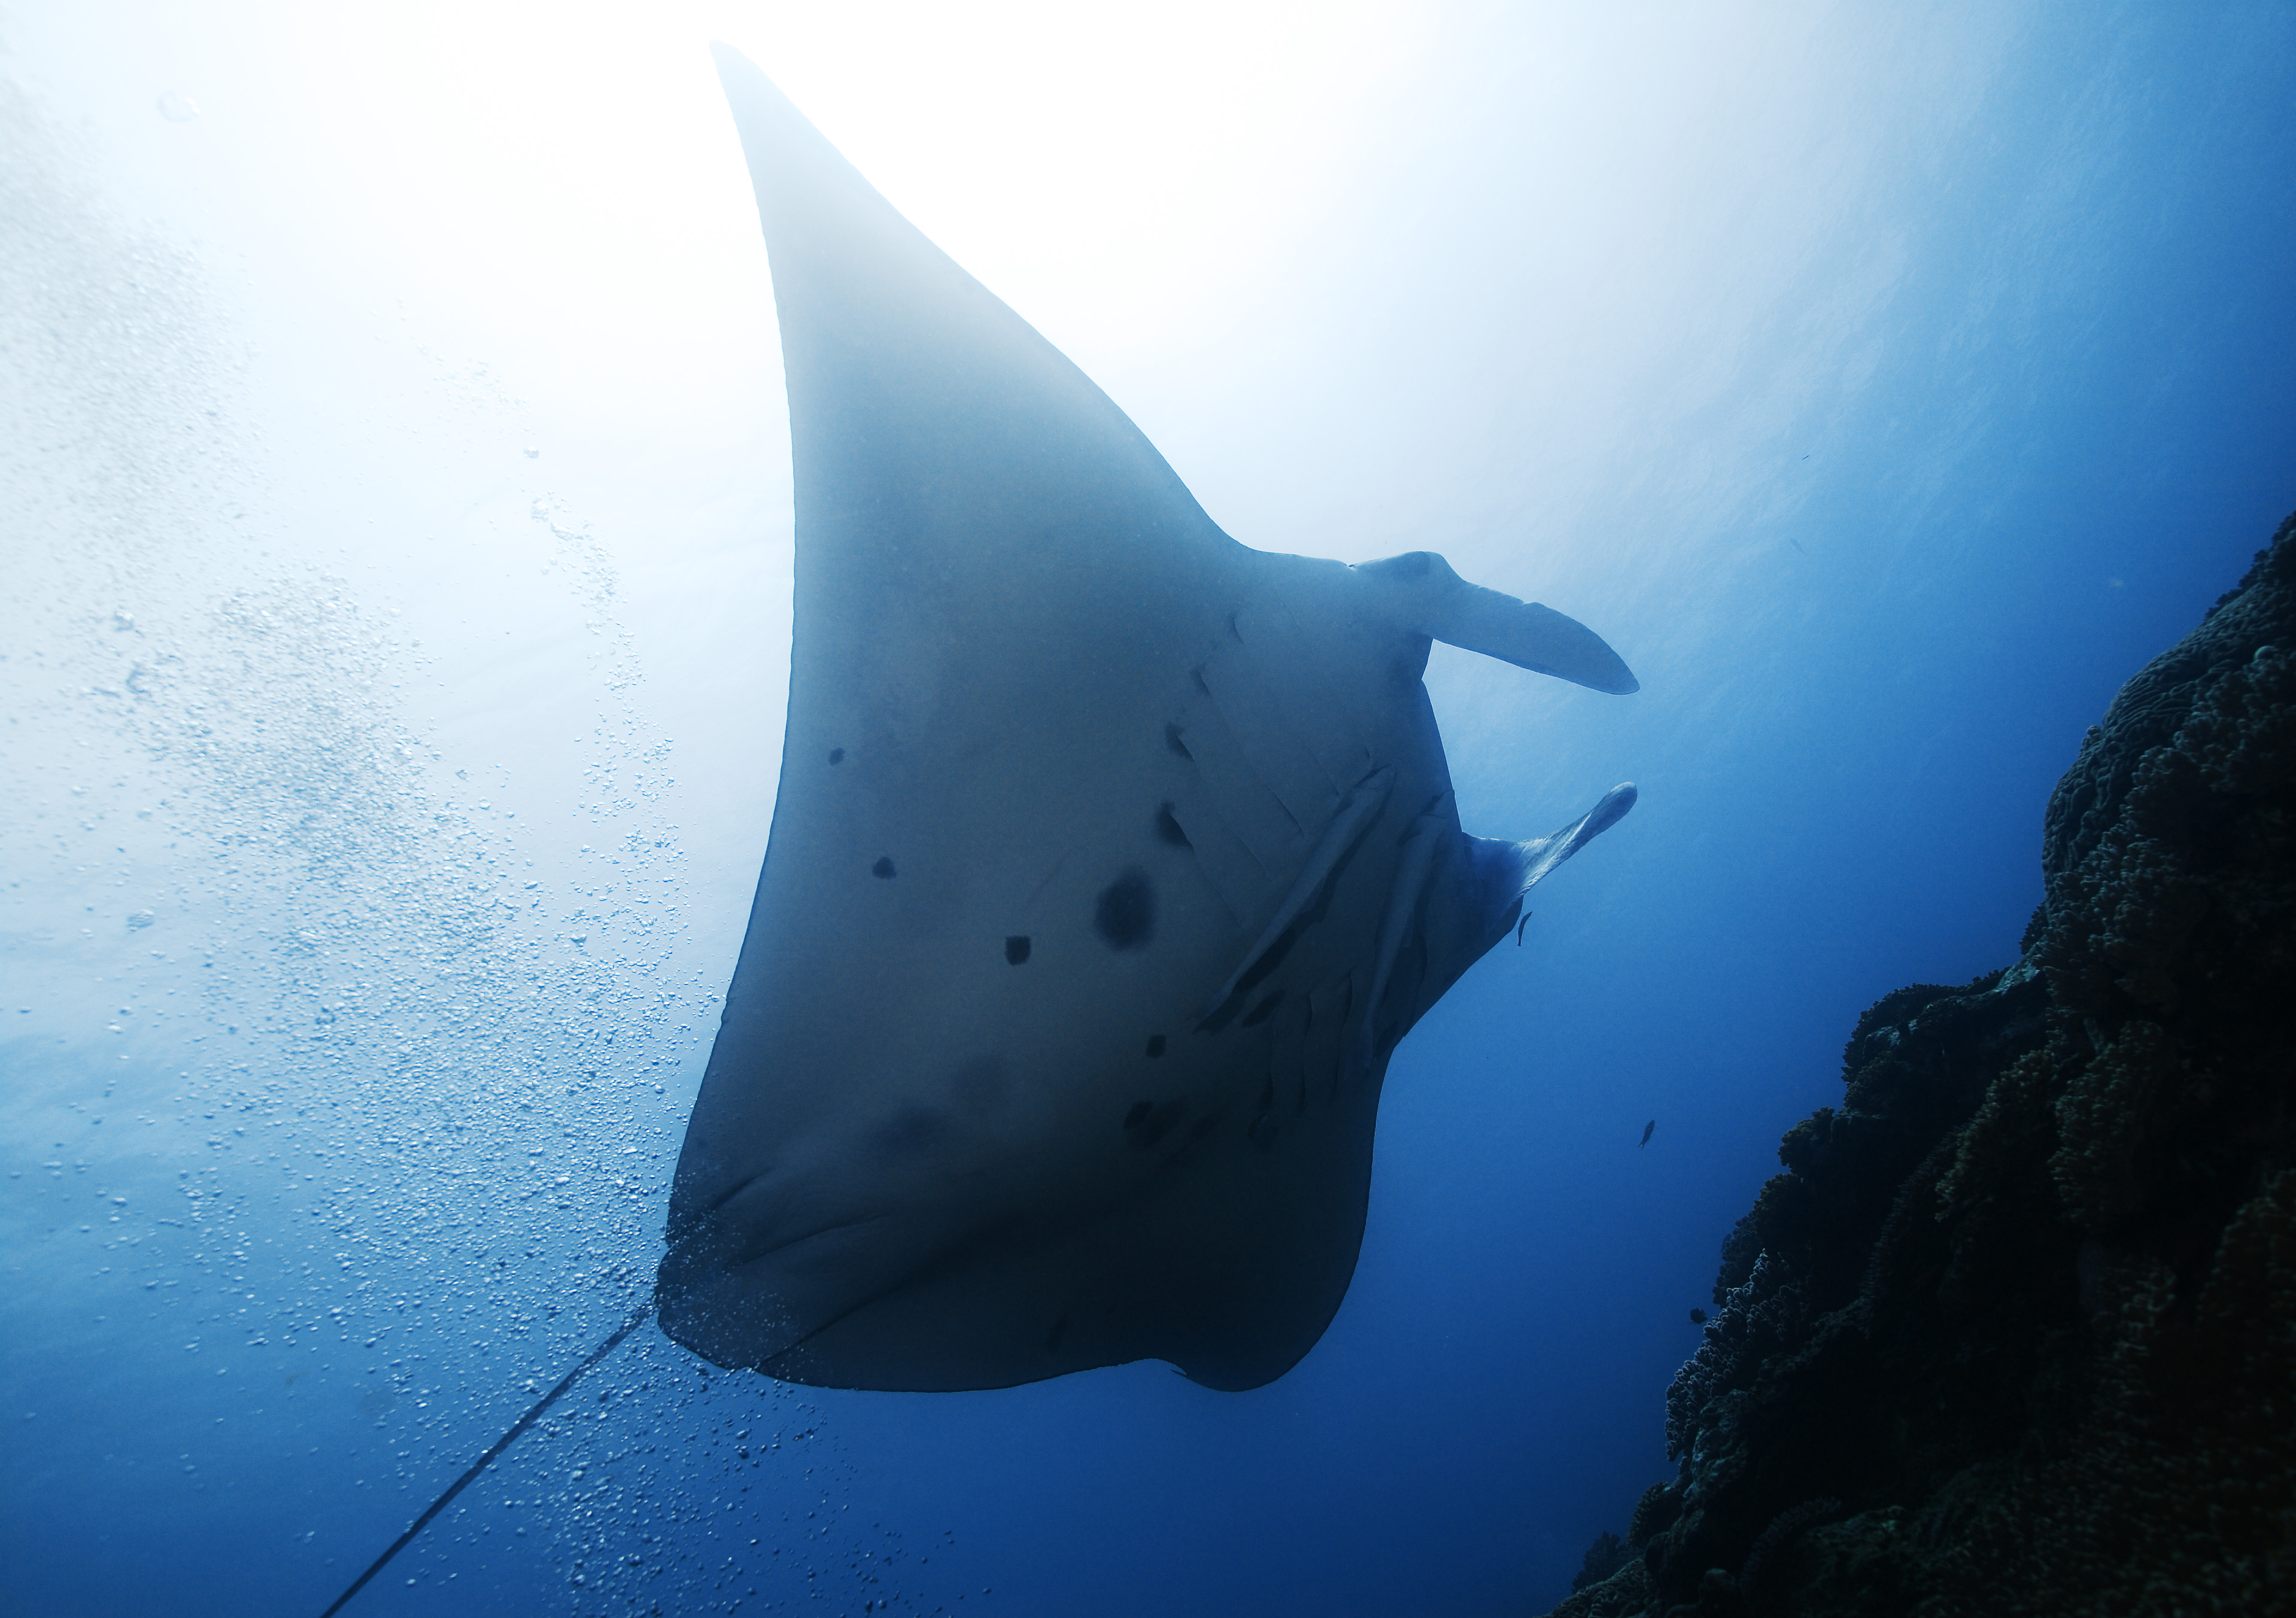 photo,material,free,landscape,picture,stock photo,Creative Commons,A dance of a manta, manta, ray, In the sea, underwater photograph